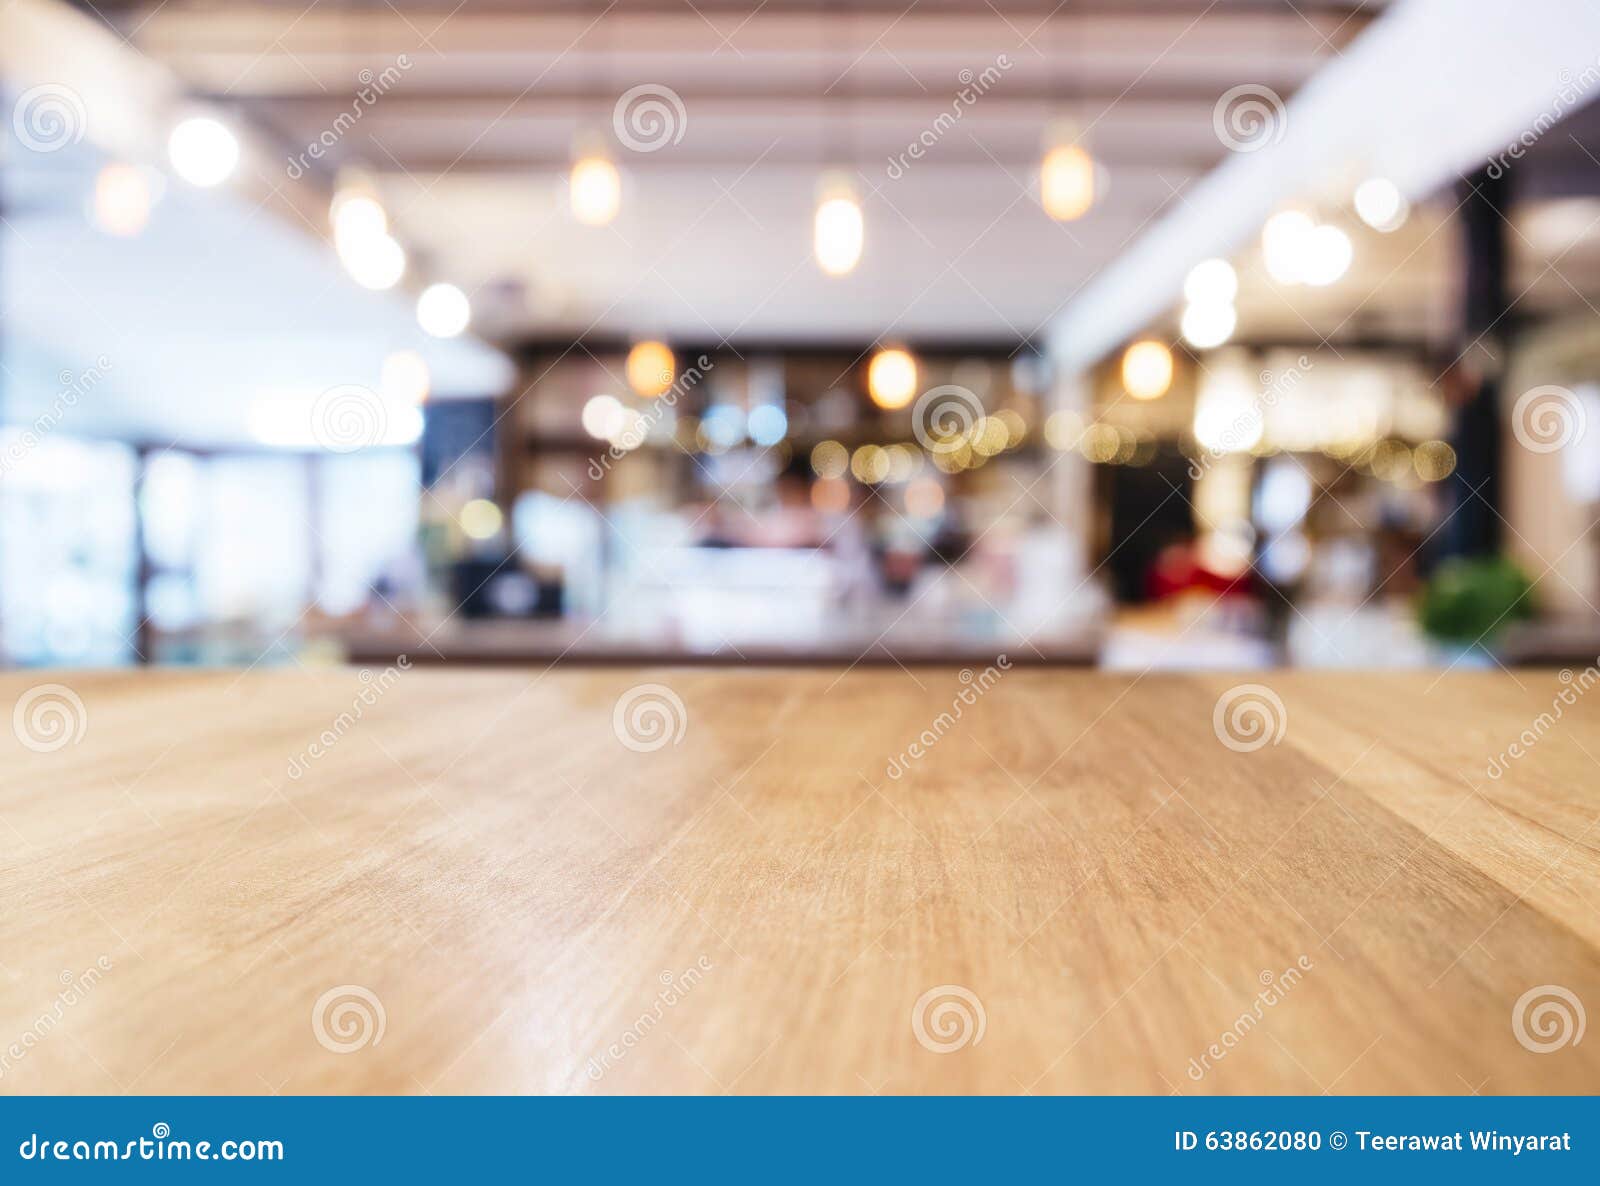 table top counter with blurred restaurant shop interior background